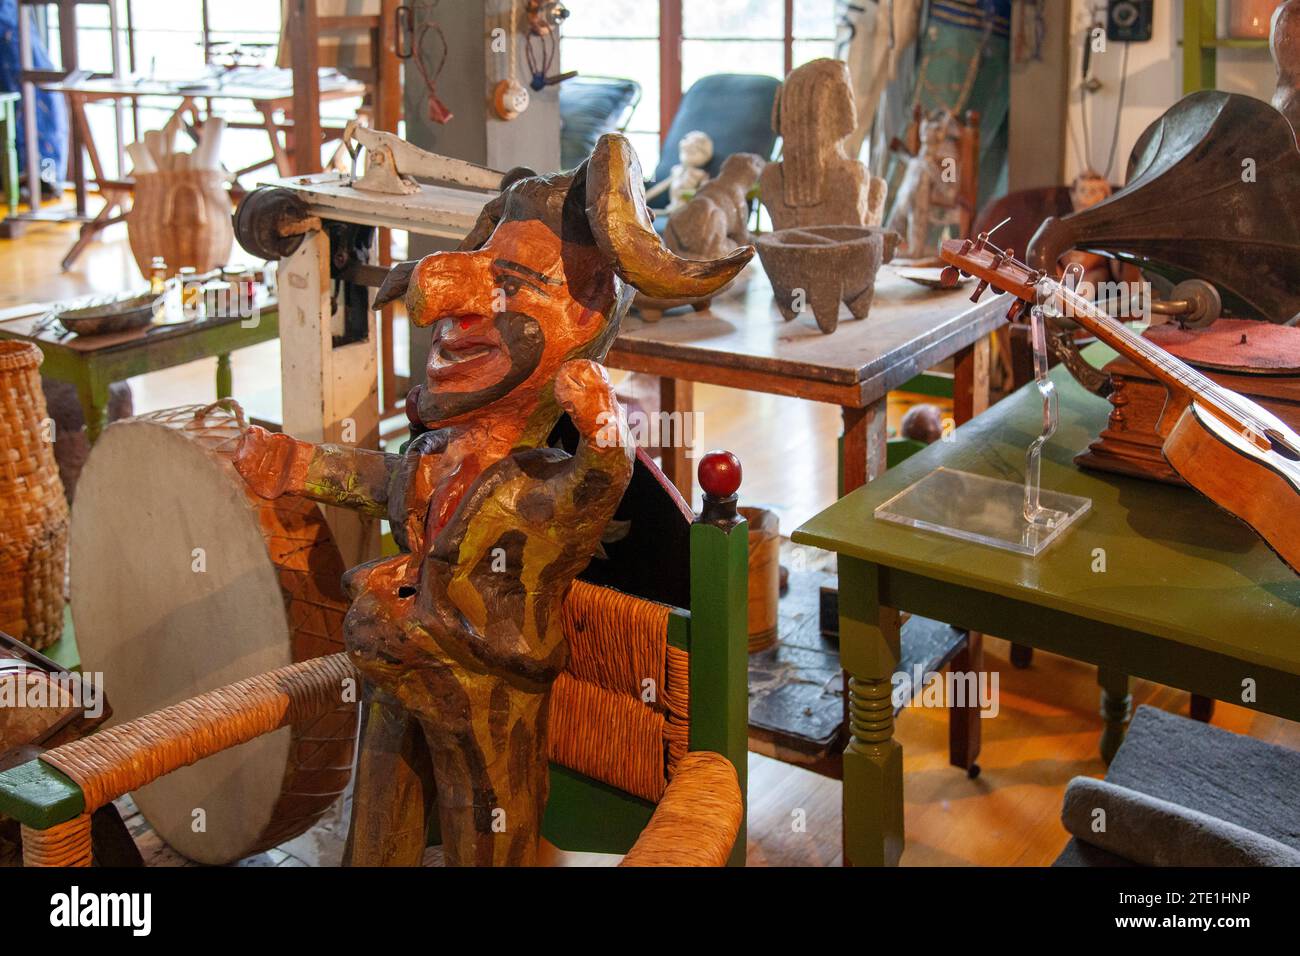 Objects at Diego Rivera and Frida Kahlo Studio and House in Mexico City, Mexico Stock Photo